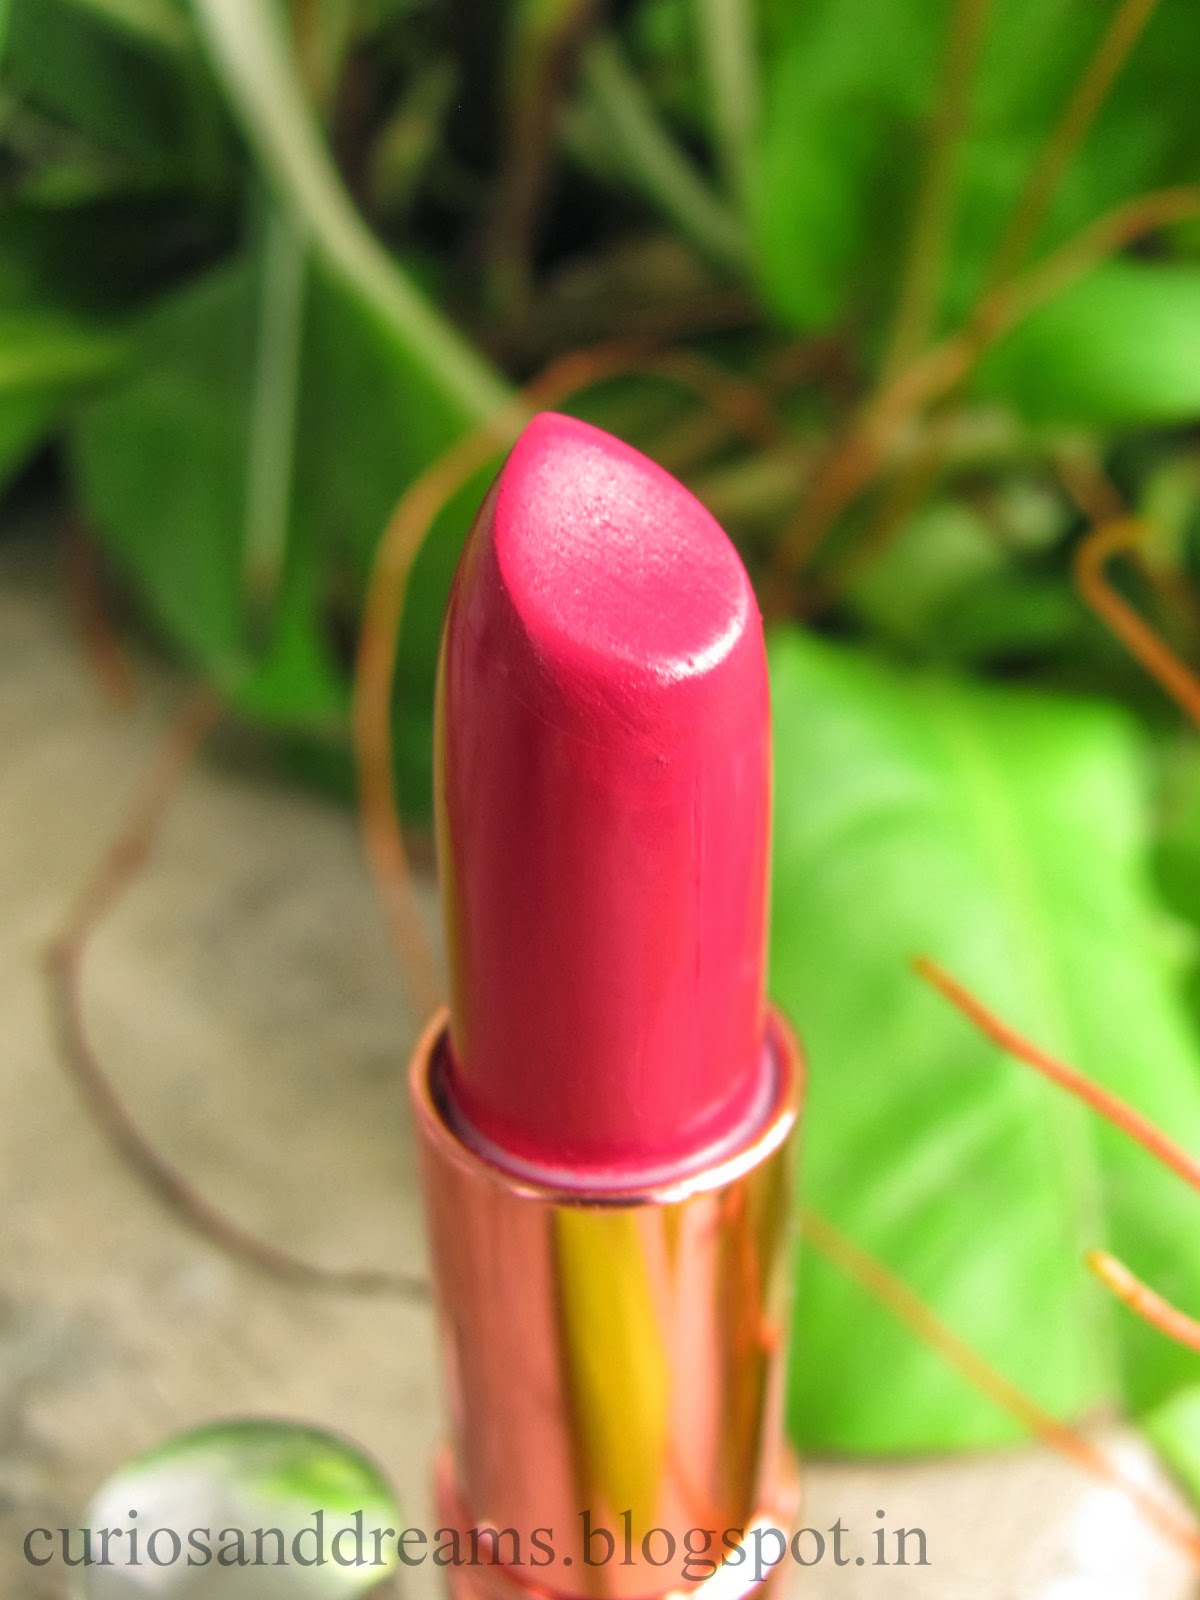 Colorbar Matte Touch Lipstick 034 Pink Hunt Review